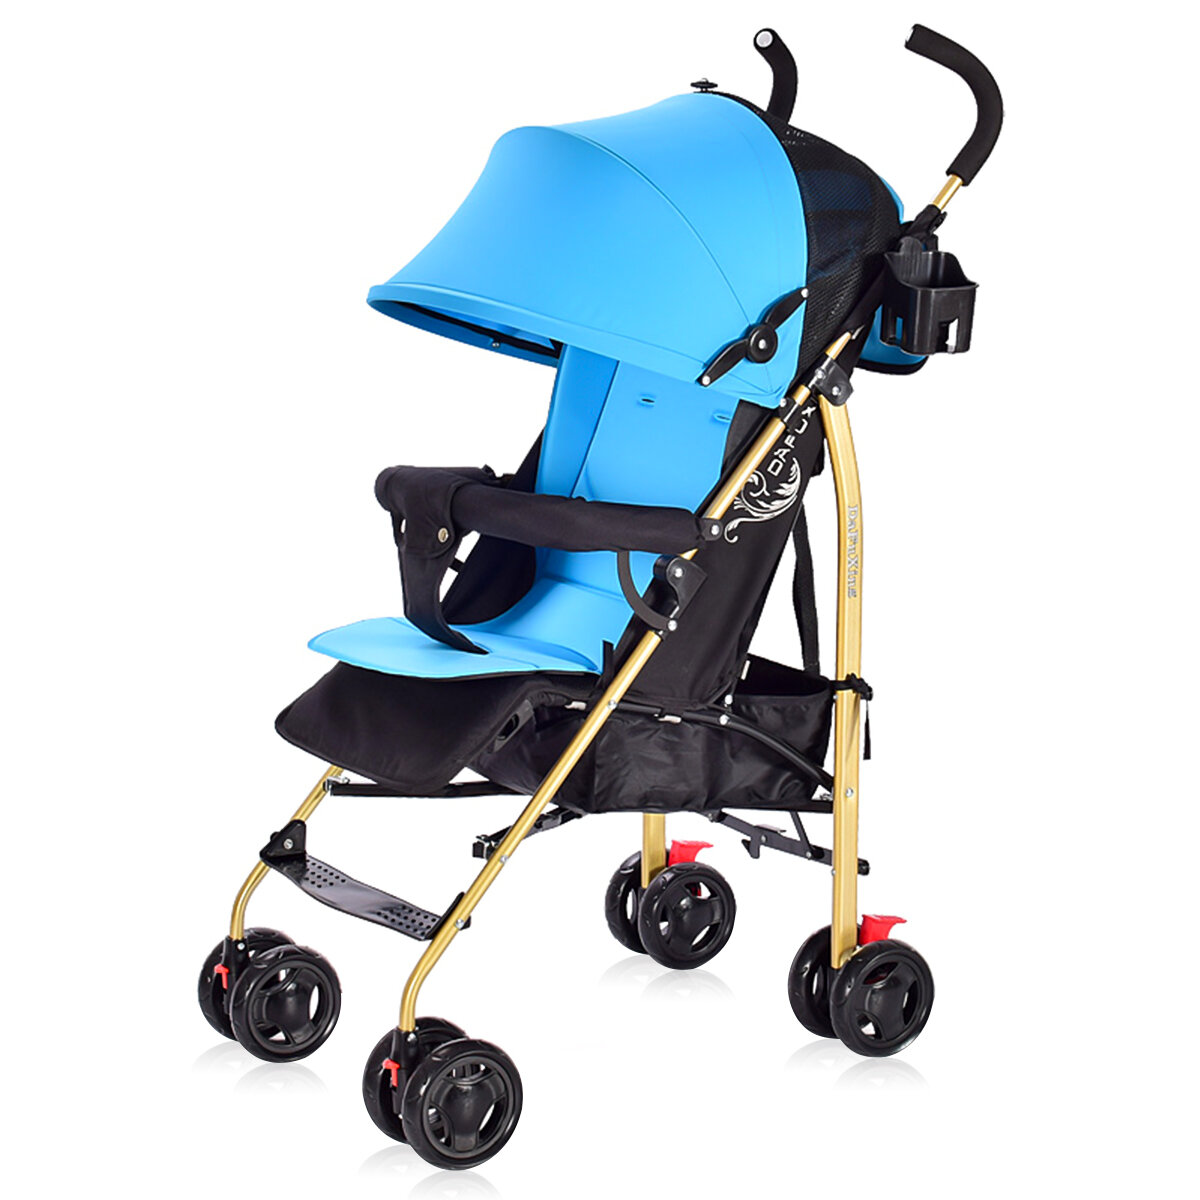 

Folding Baby Stroller 100-175° Adjustable Anti-UV Panel Canopy 4-wheels Kids Pushchair for 0-3 Years Old